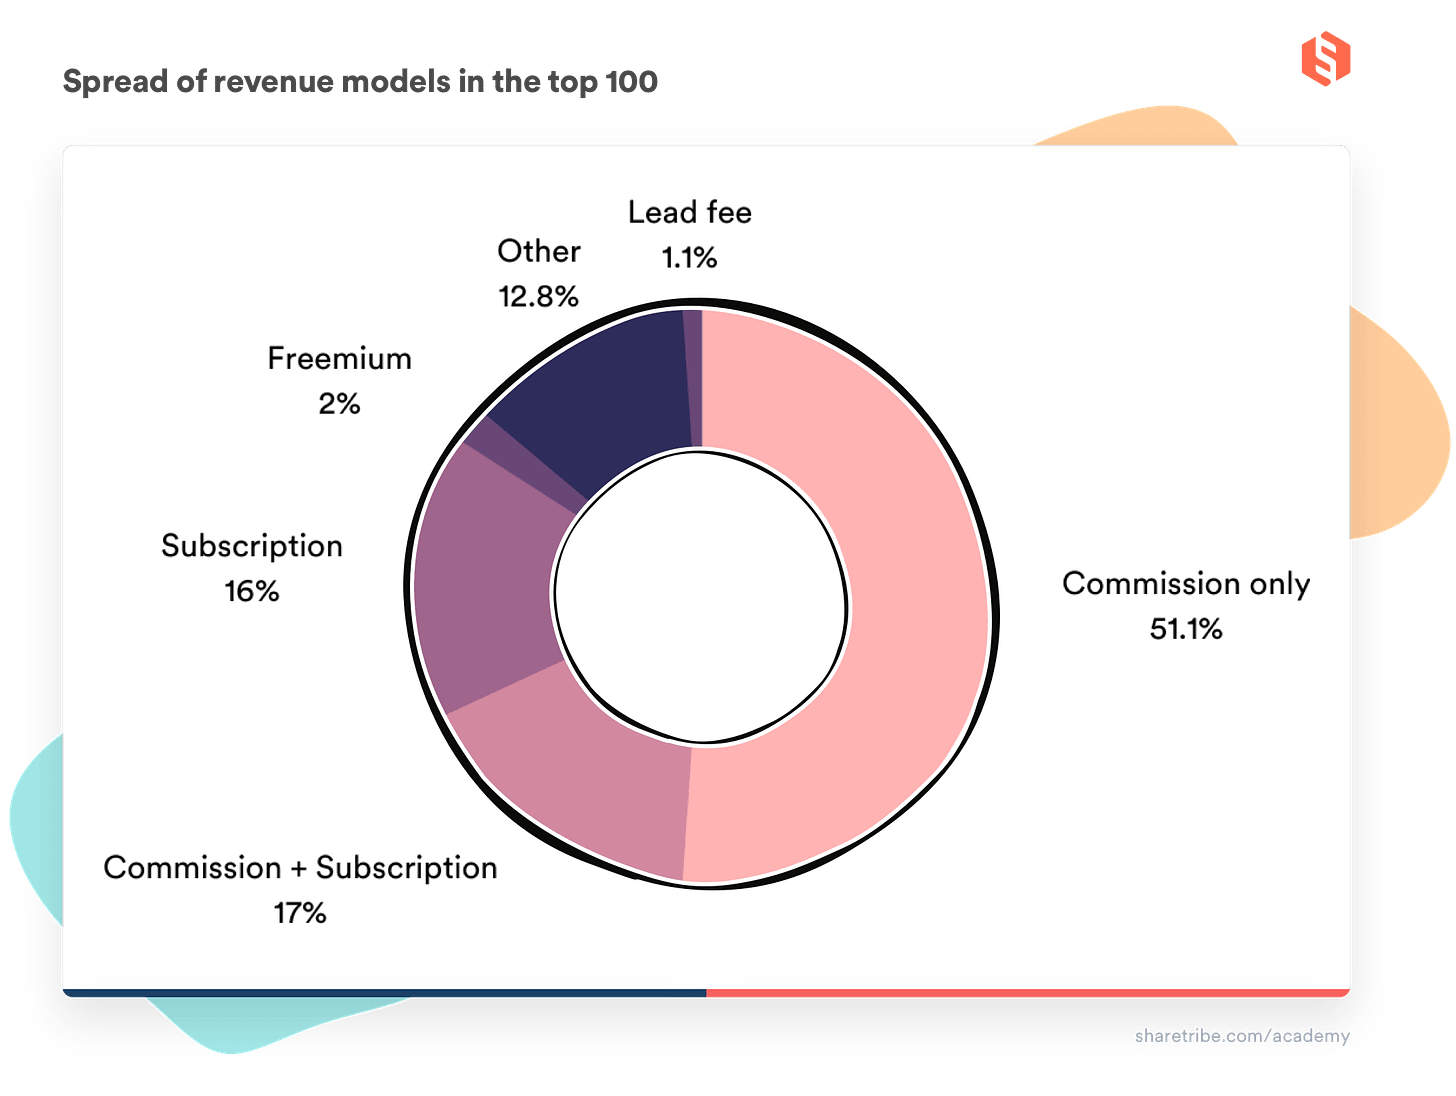 A donut chart of the percentages of different revenue models in the top 100.